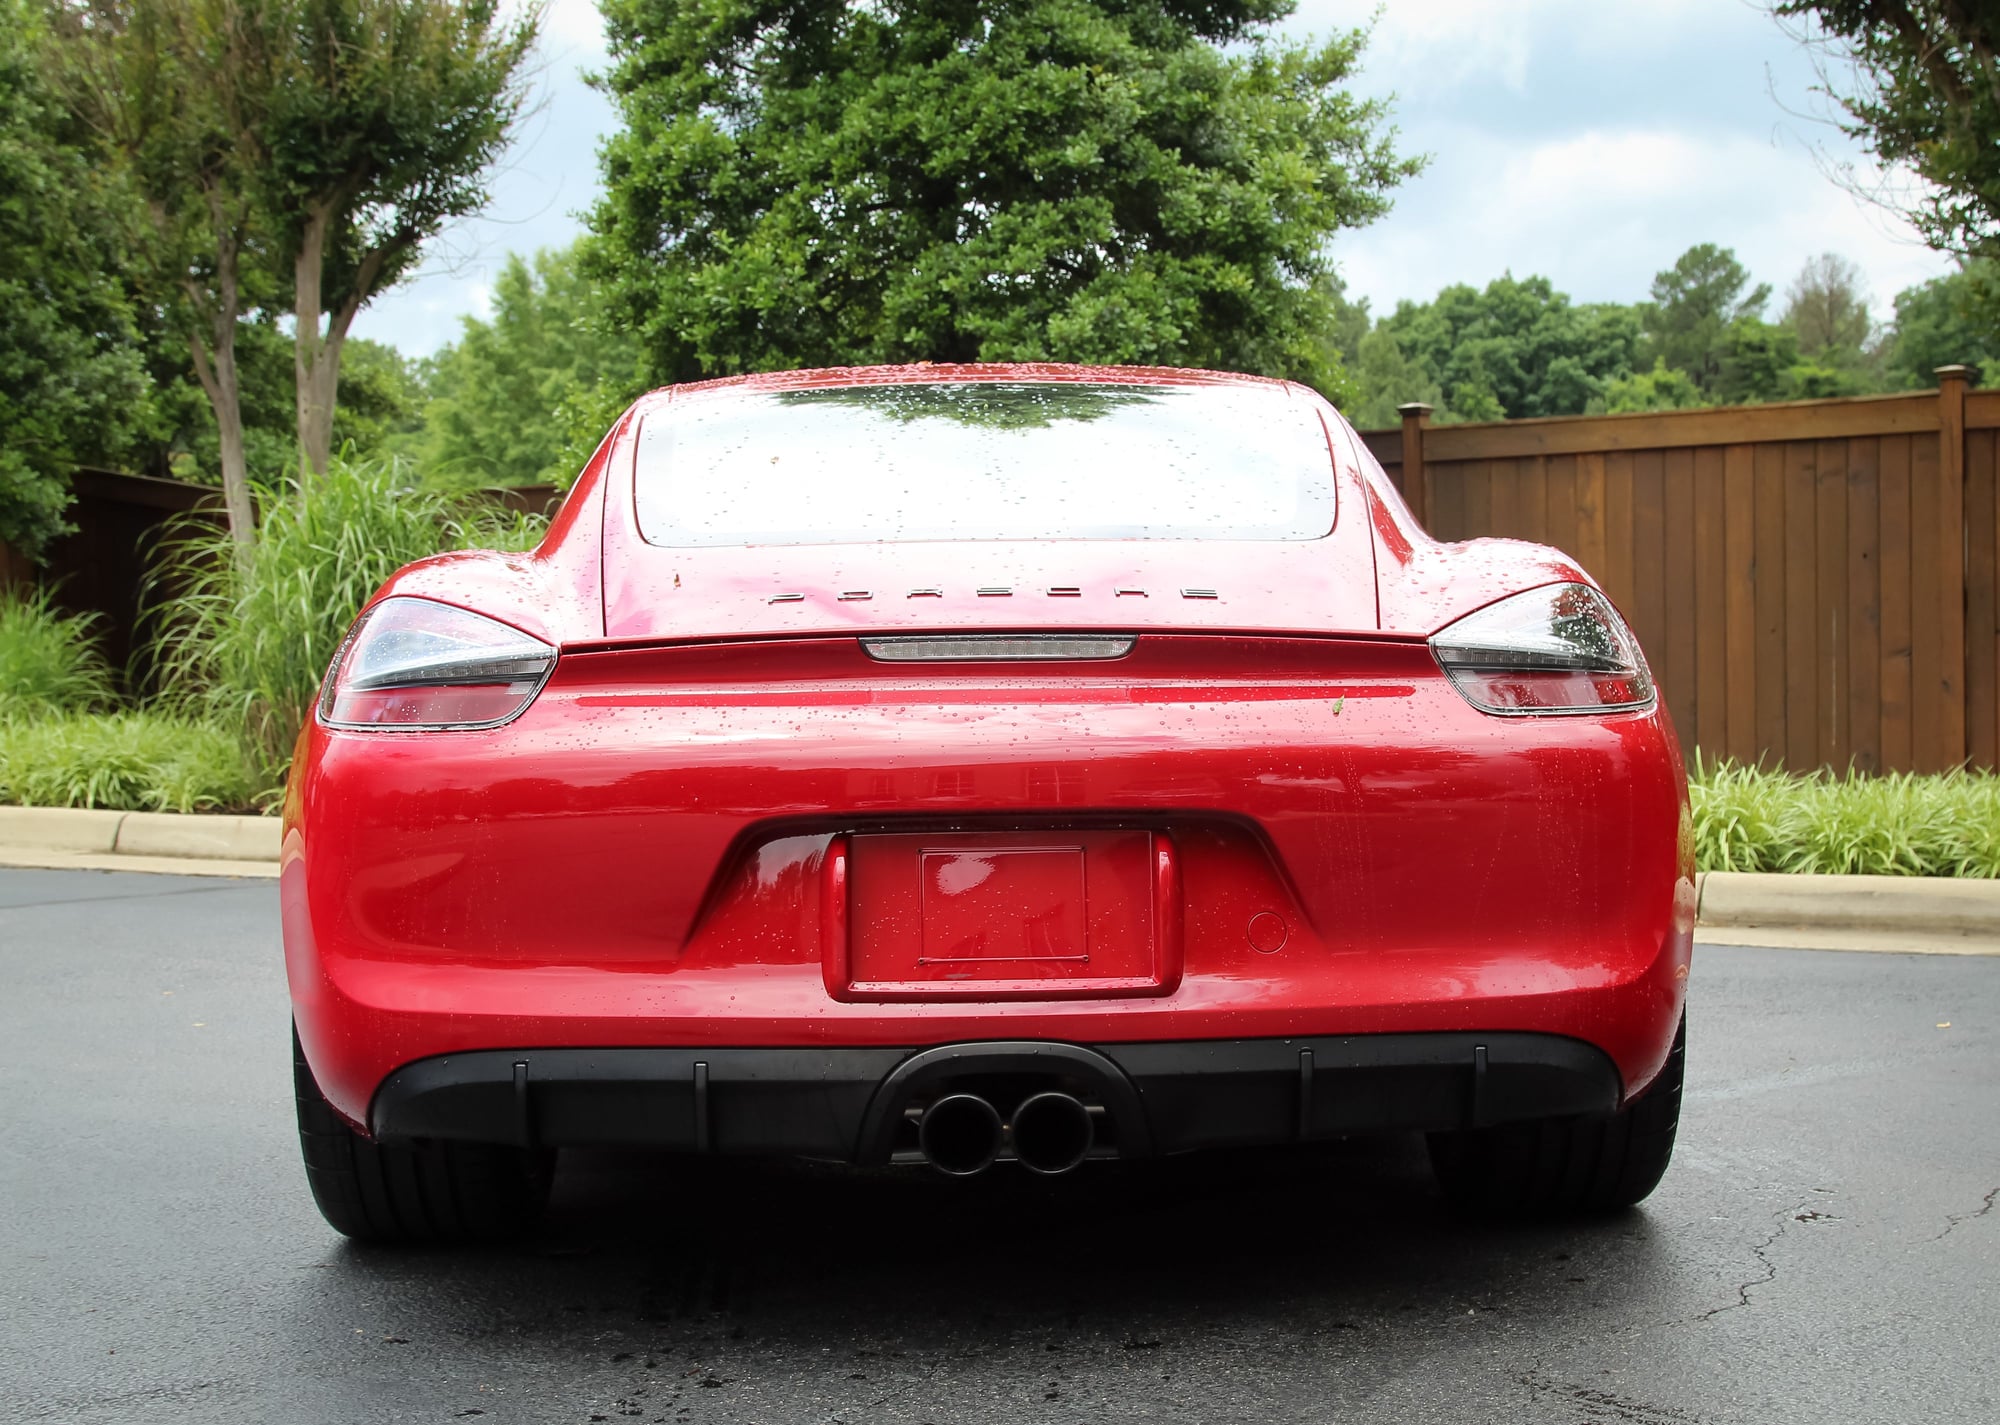 2016 Porsche Cayman - 2016 Porsche Cayman-Manual-Carmine Red-Certified! - Used - VIN WP0AB2A84GK186283 - 11,385 Miles - 6 cyl - 2WD - Manual - Coupe - Red - Richmond, VA 23113, United States